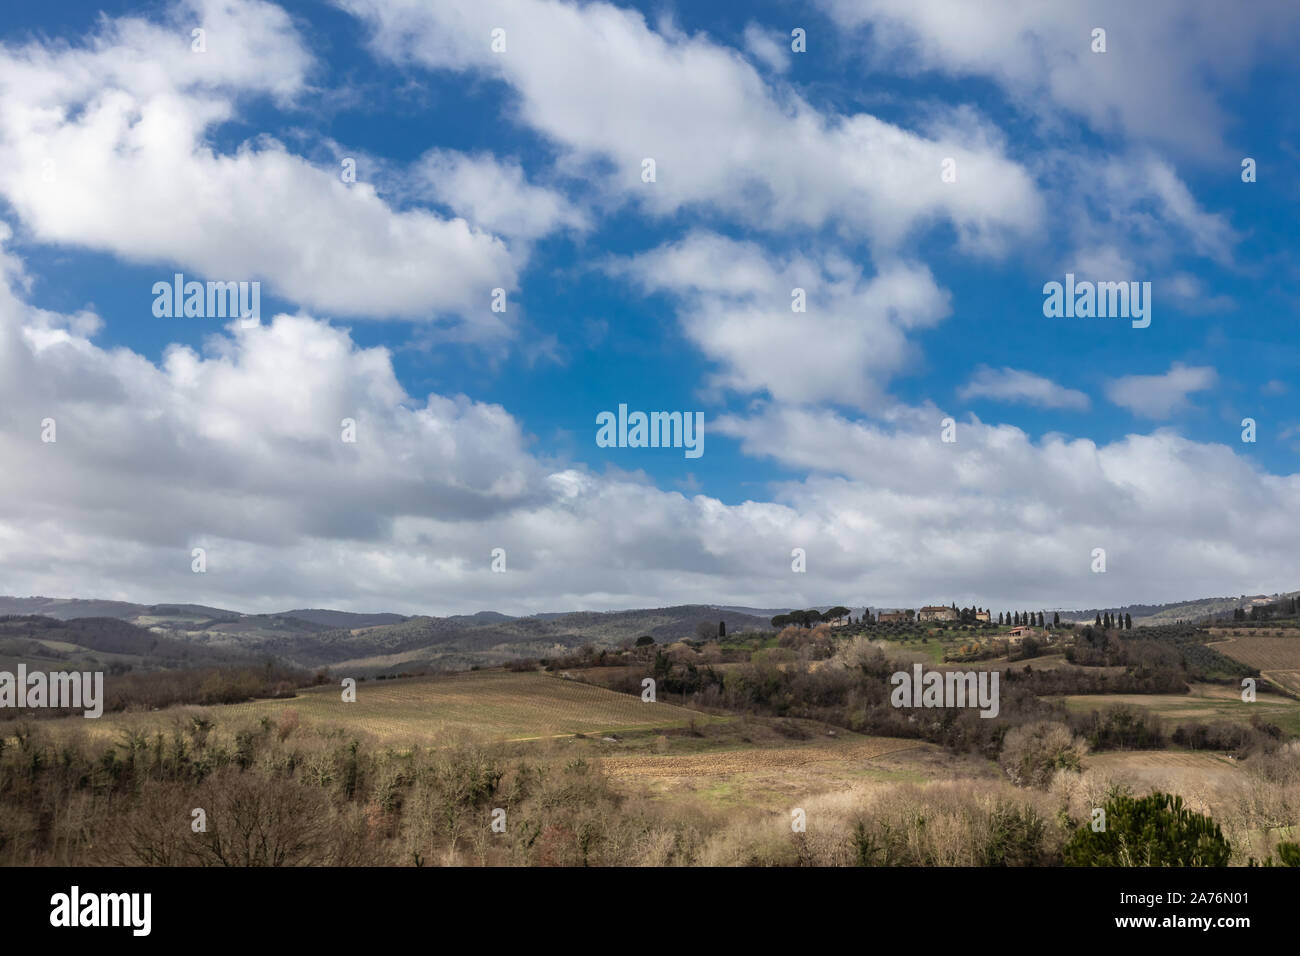 Rural landscape and vineyards in Tuscany, Italy Stock Photo